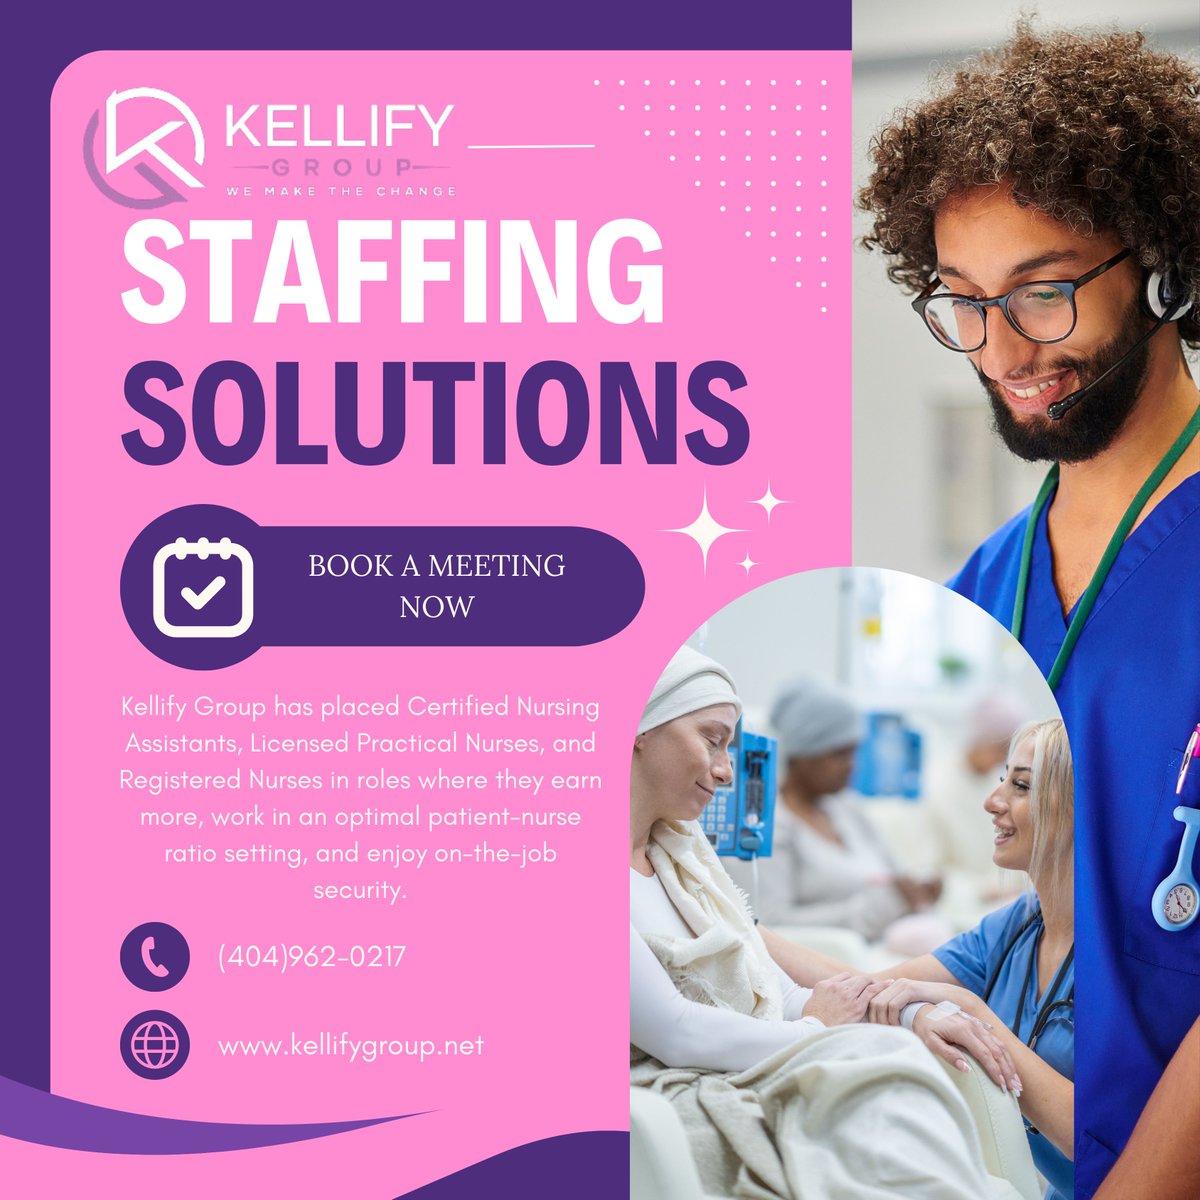 See the difference! Book a meeting now!
#StaffingTips #PartneringSuccess #EffectiveCommunication #LongTermPartnership #StaffingSolutions #HealthcareStaffing #QualifiedProfessionals #OptimalStaffing #Collaboration #SuccessInWorkforce #KellifyGroup